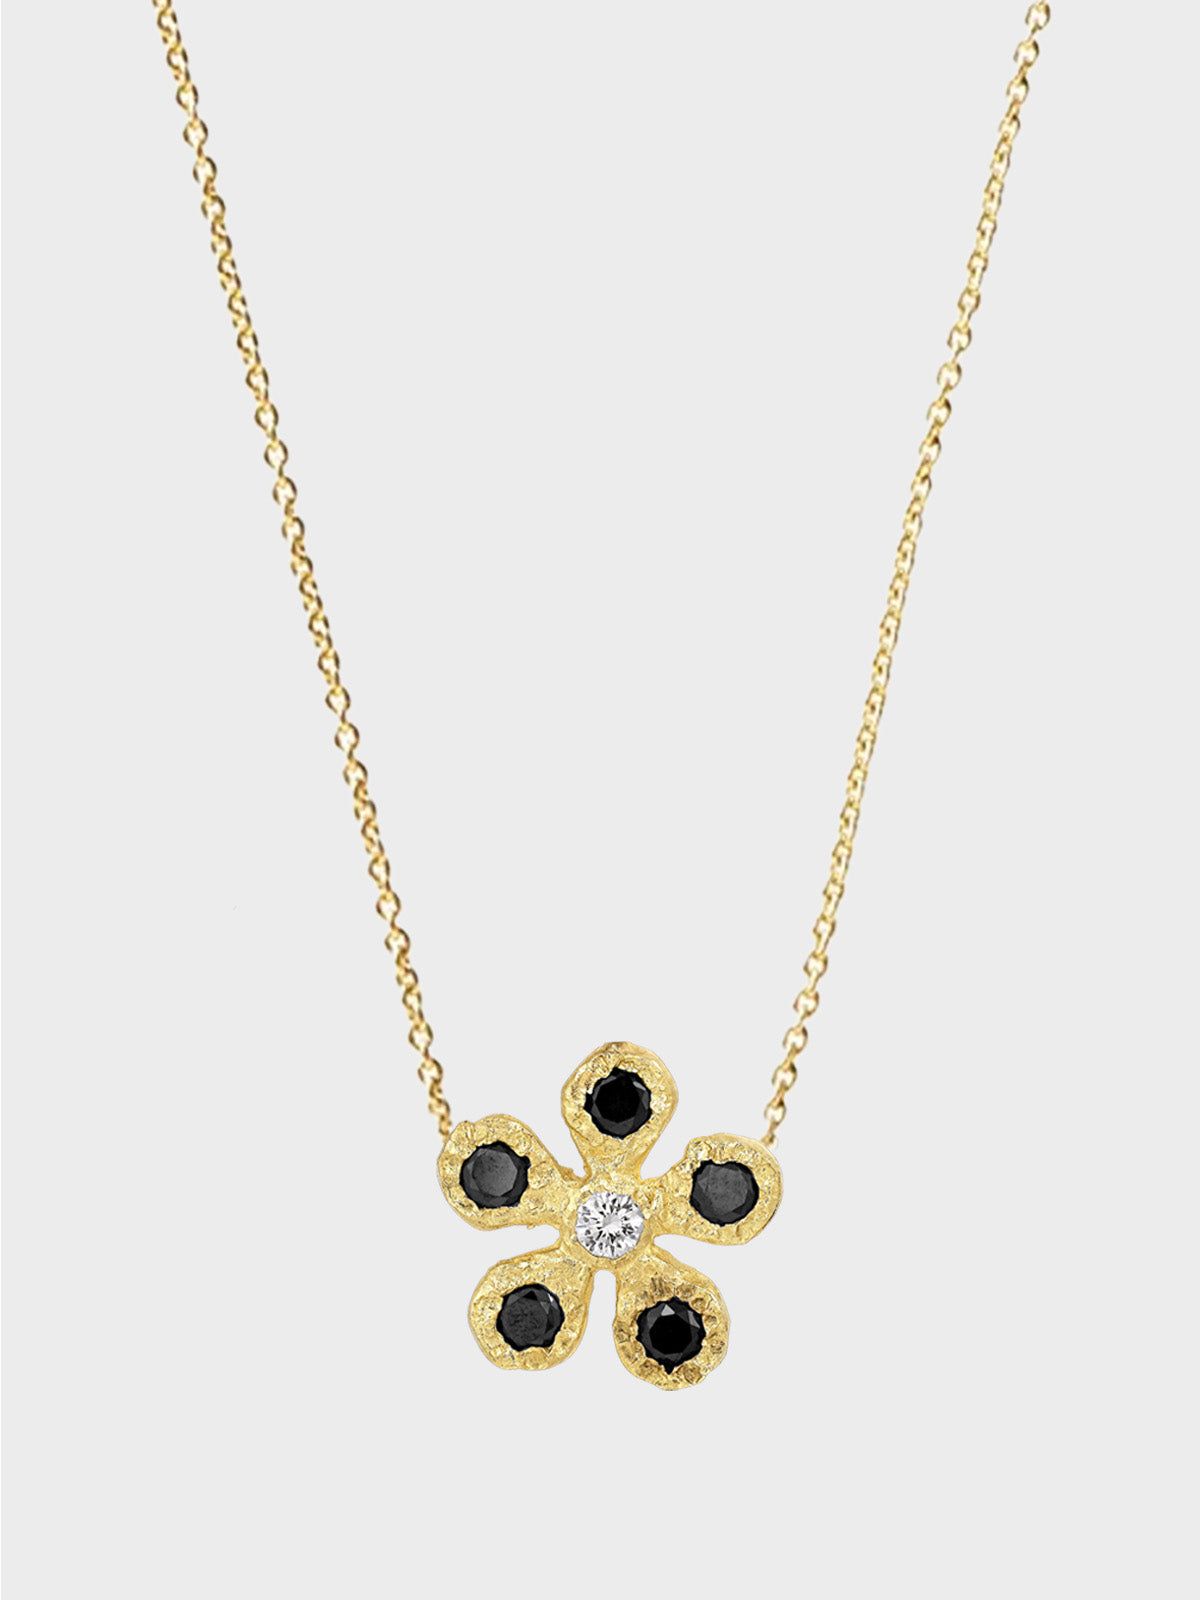 Elhanati - Small Flores 0.30ct Black Necklace in 18K Yellow Gold